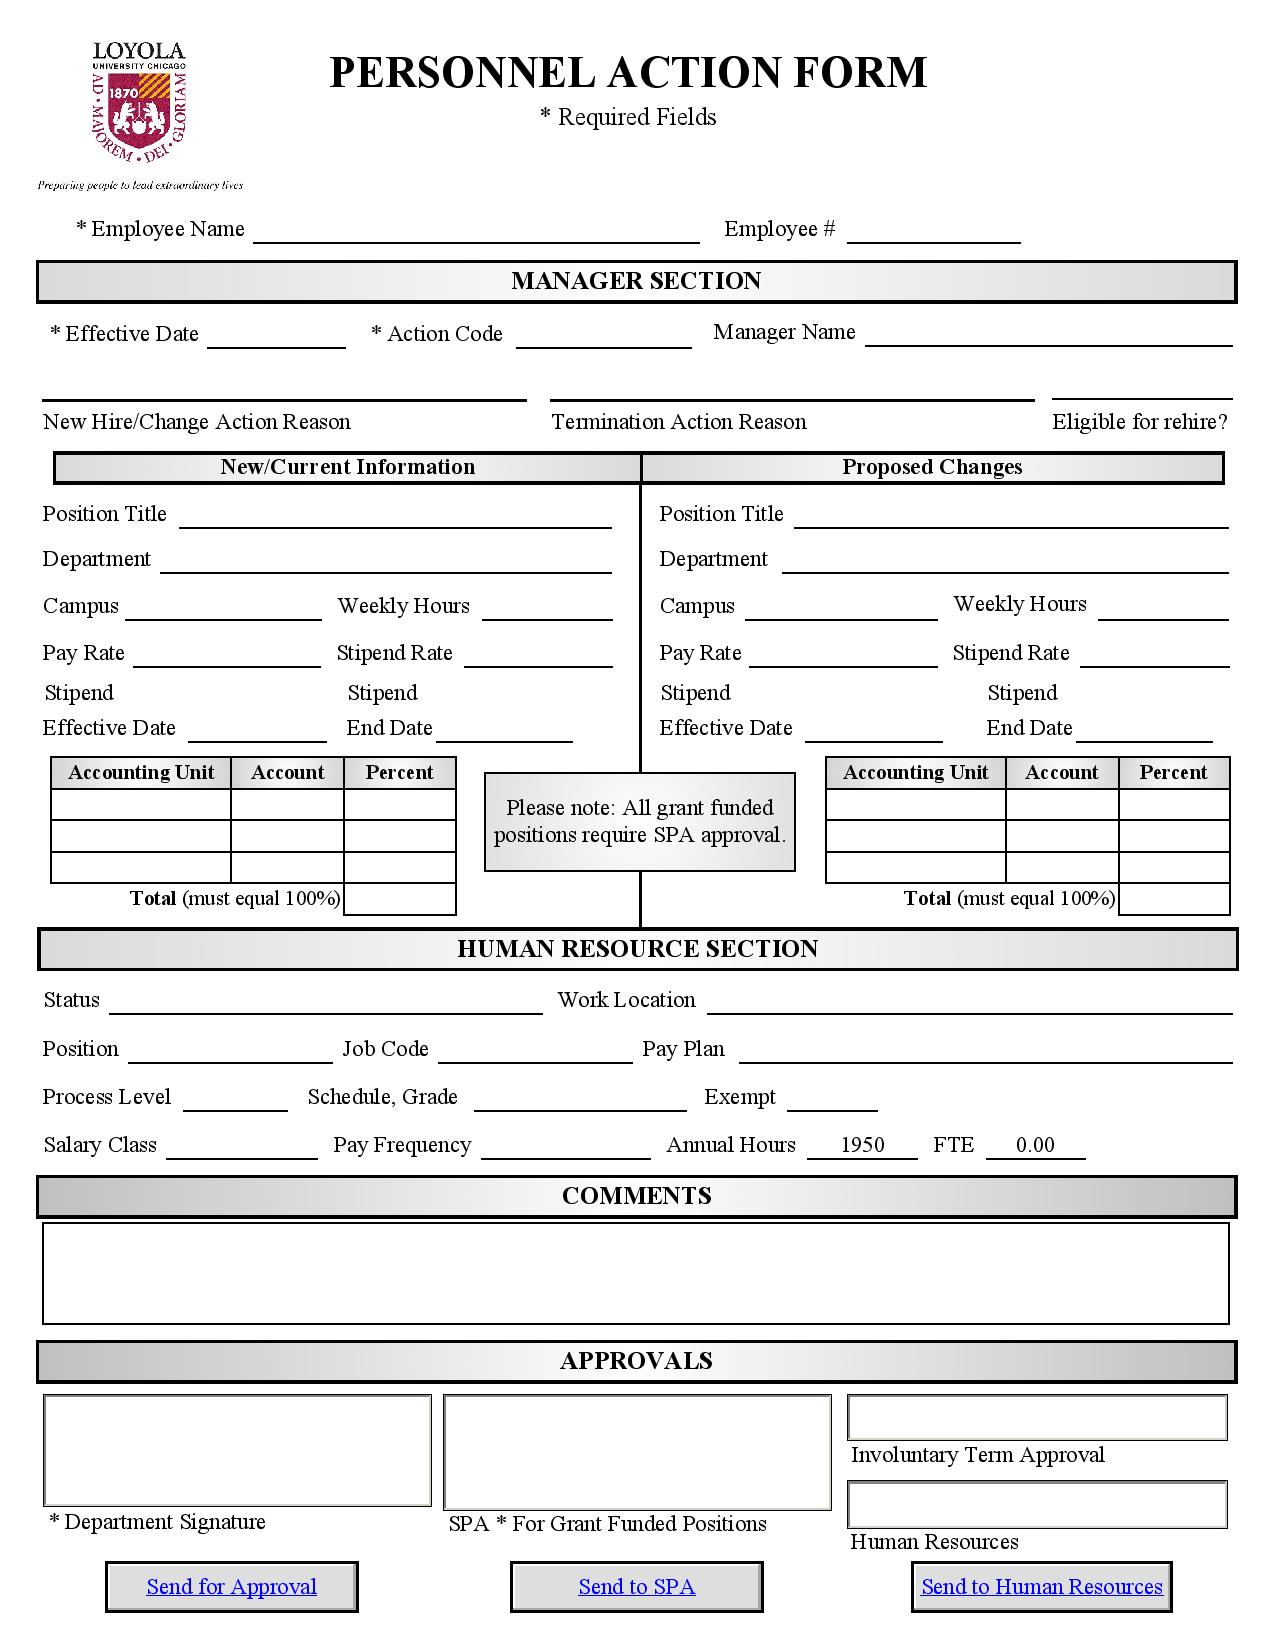 personnel action form in pdf template page 001